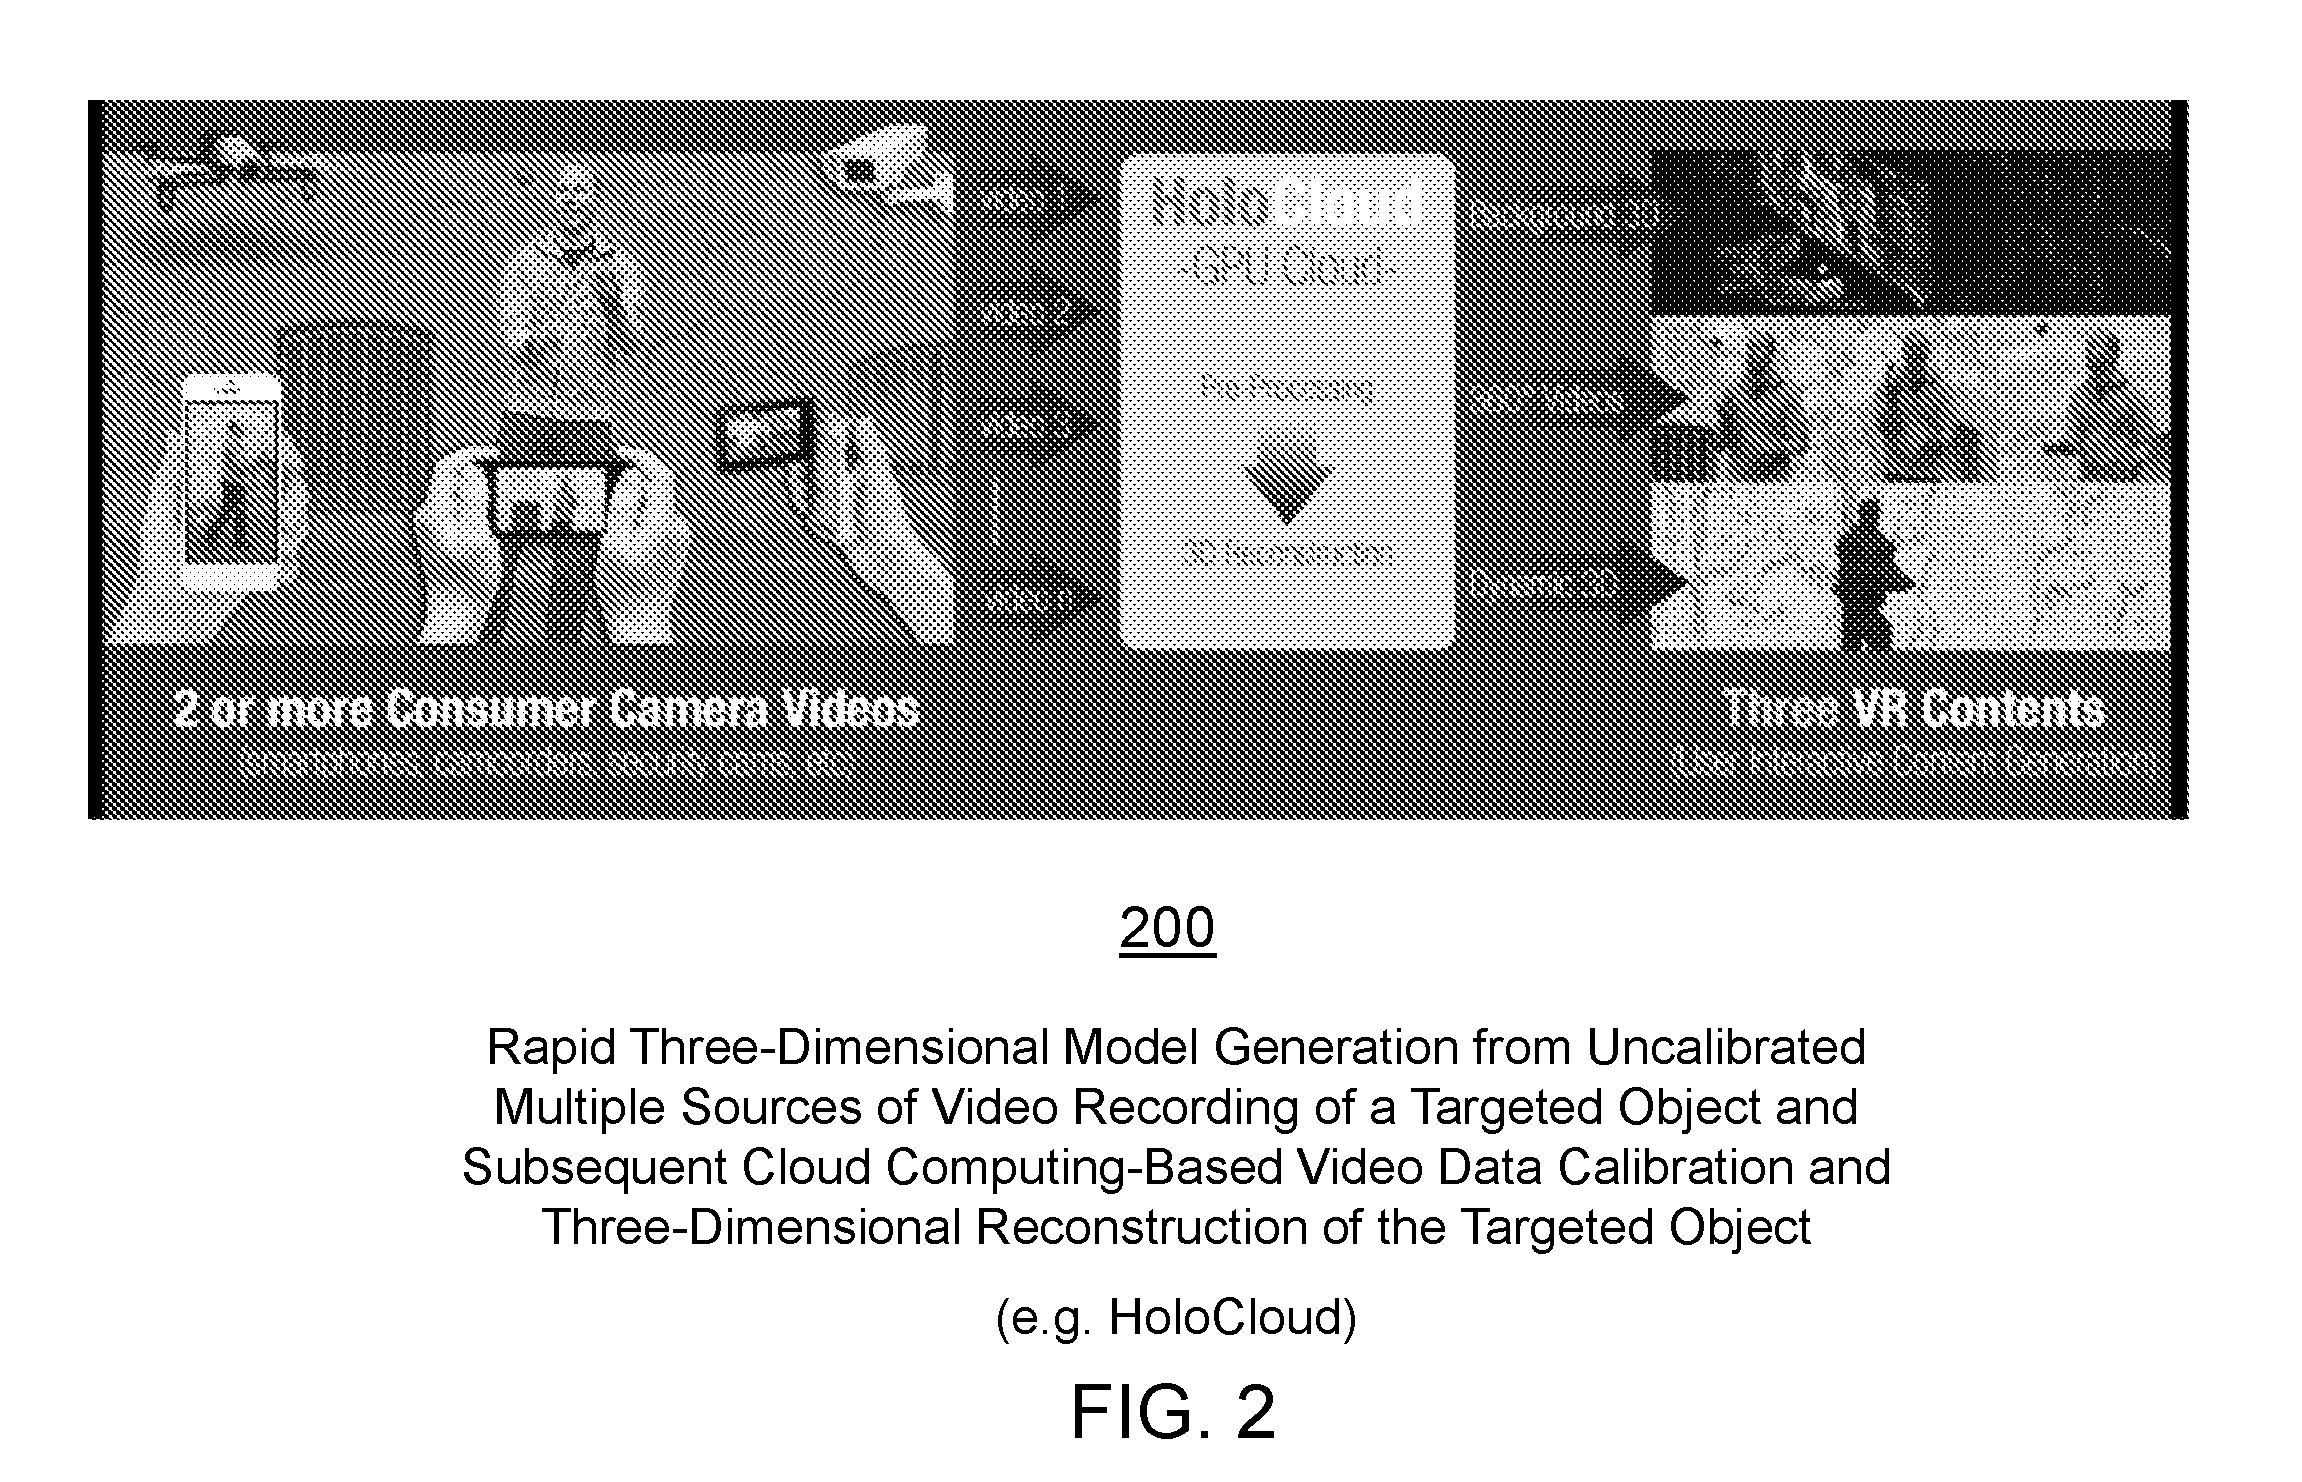 Real-Time 3D Virtual or Physical Model Generating Apparatus for HoloPortal and HoloCloud System